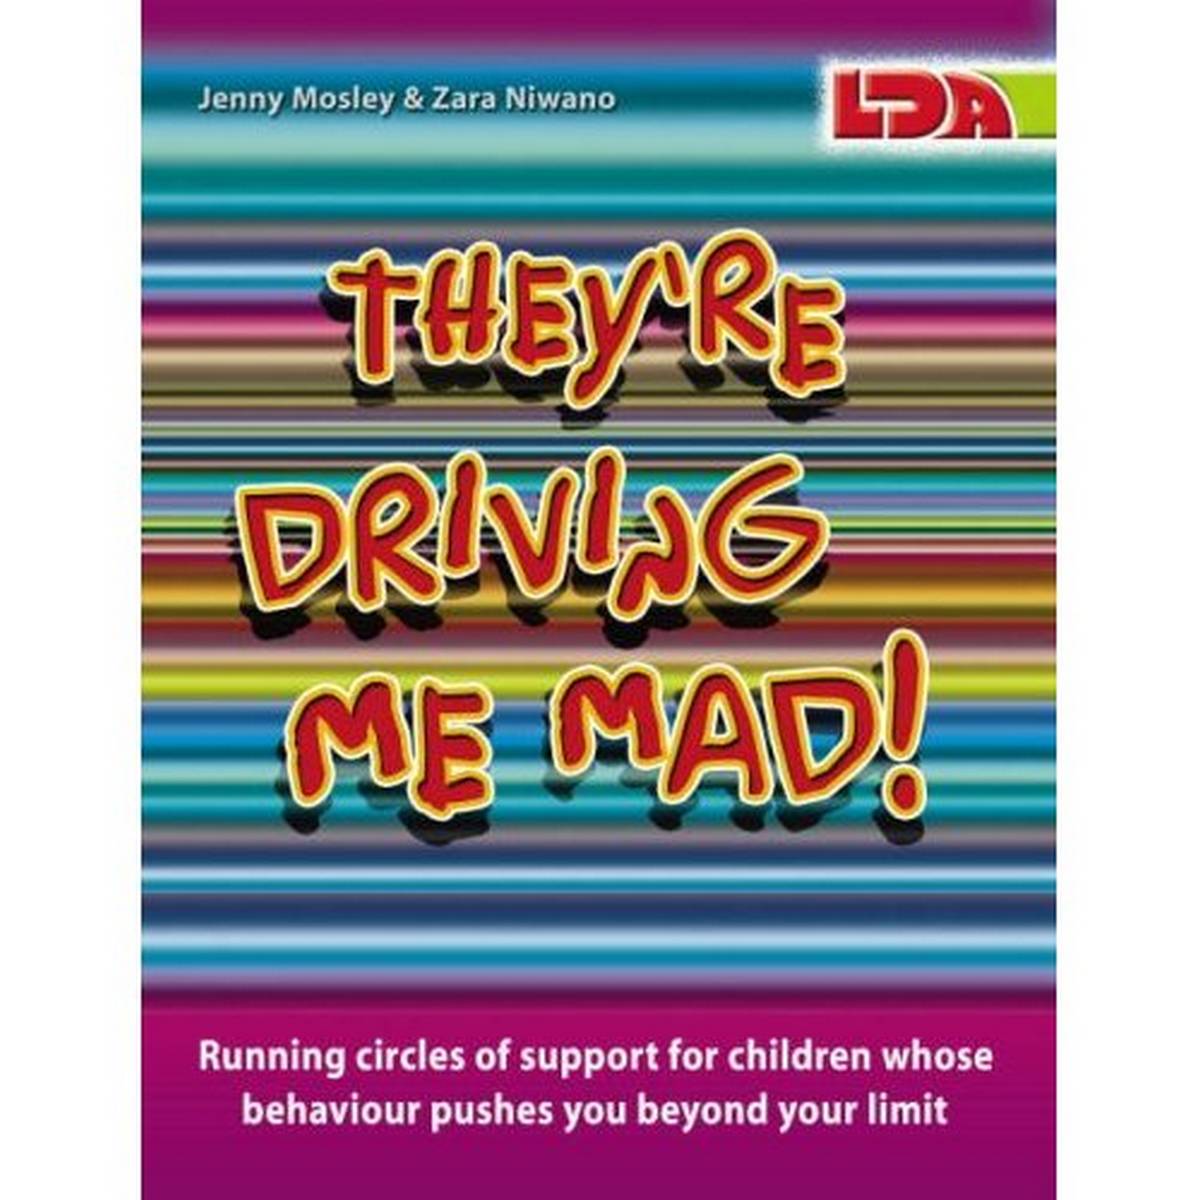 They're Driving Me Mad!: Running Circles of Support for Children